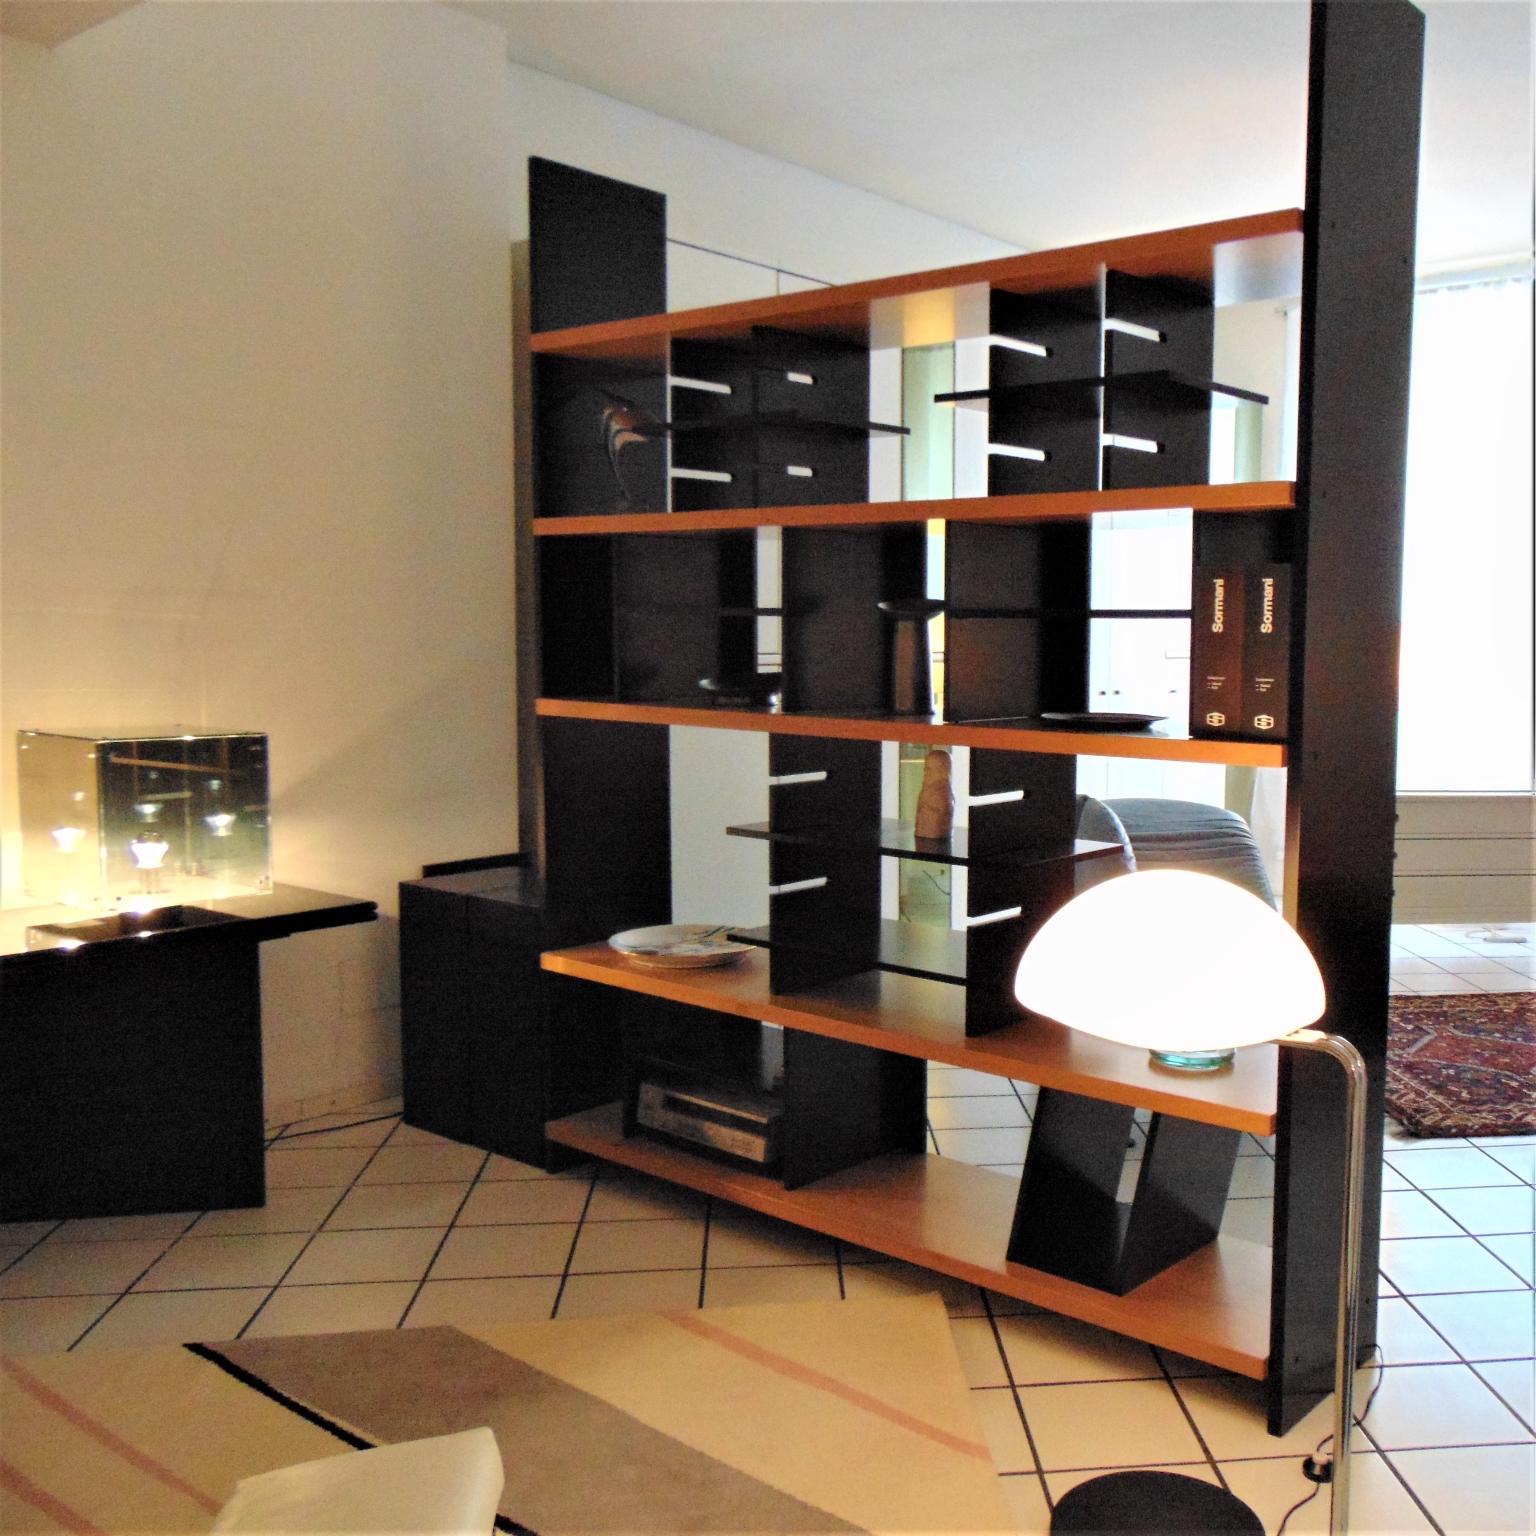 Lacquered 1980s Bookshelf, Walnut and Black Satin Lacquer, Sormani, Italy For Sale